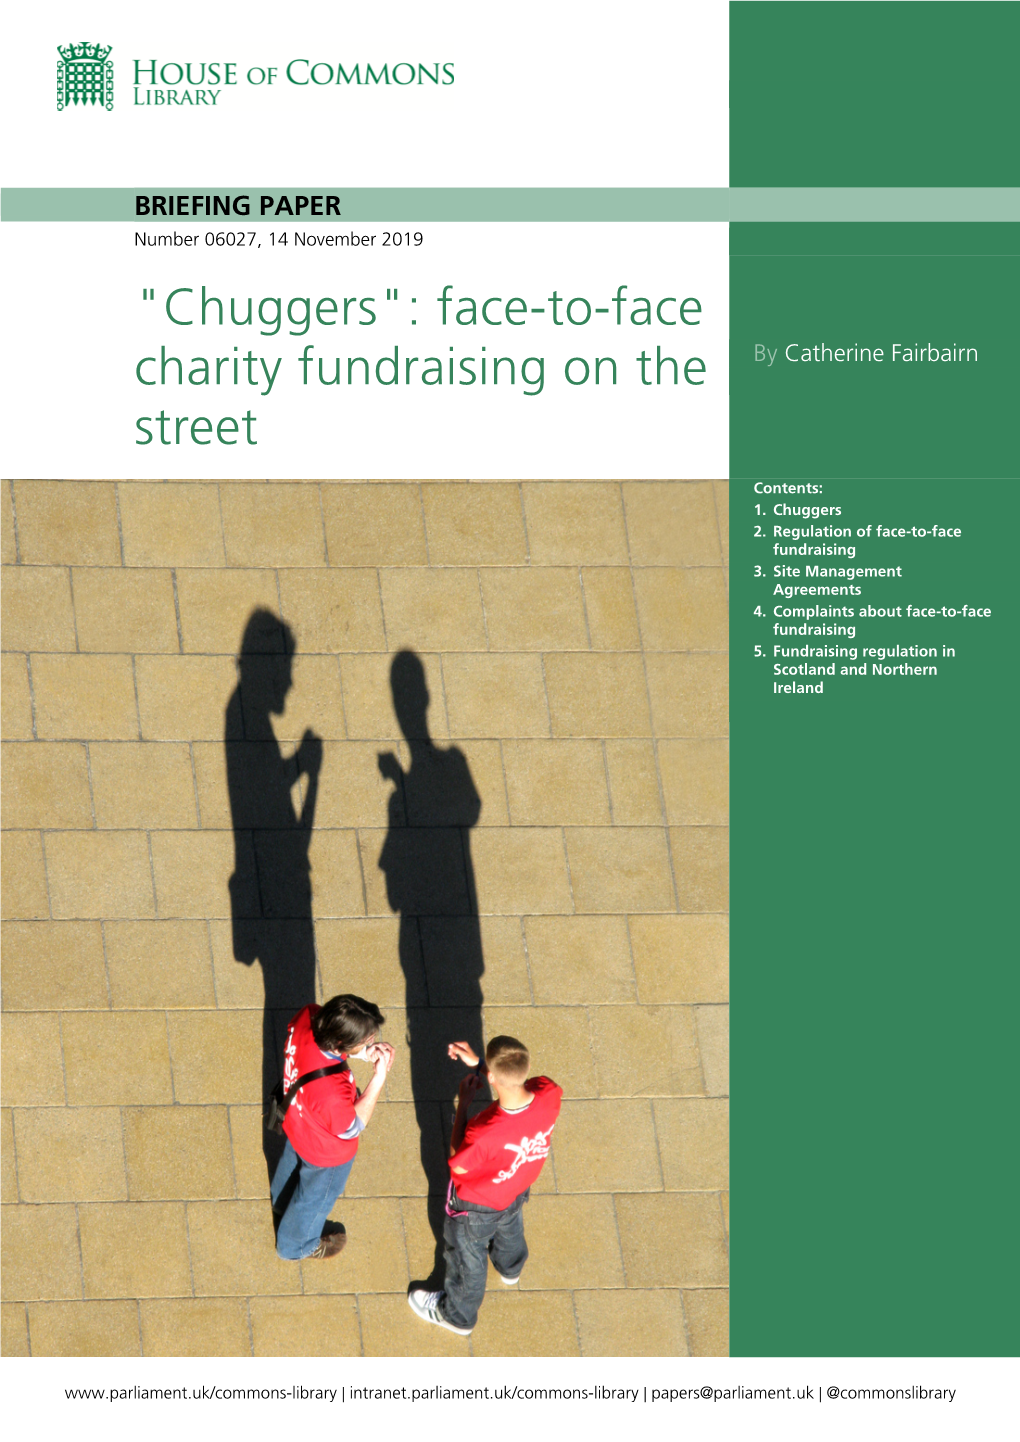 "Chuggers": Face-To-Face Charity Fundraising on the Street